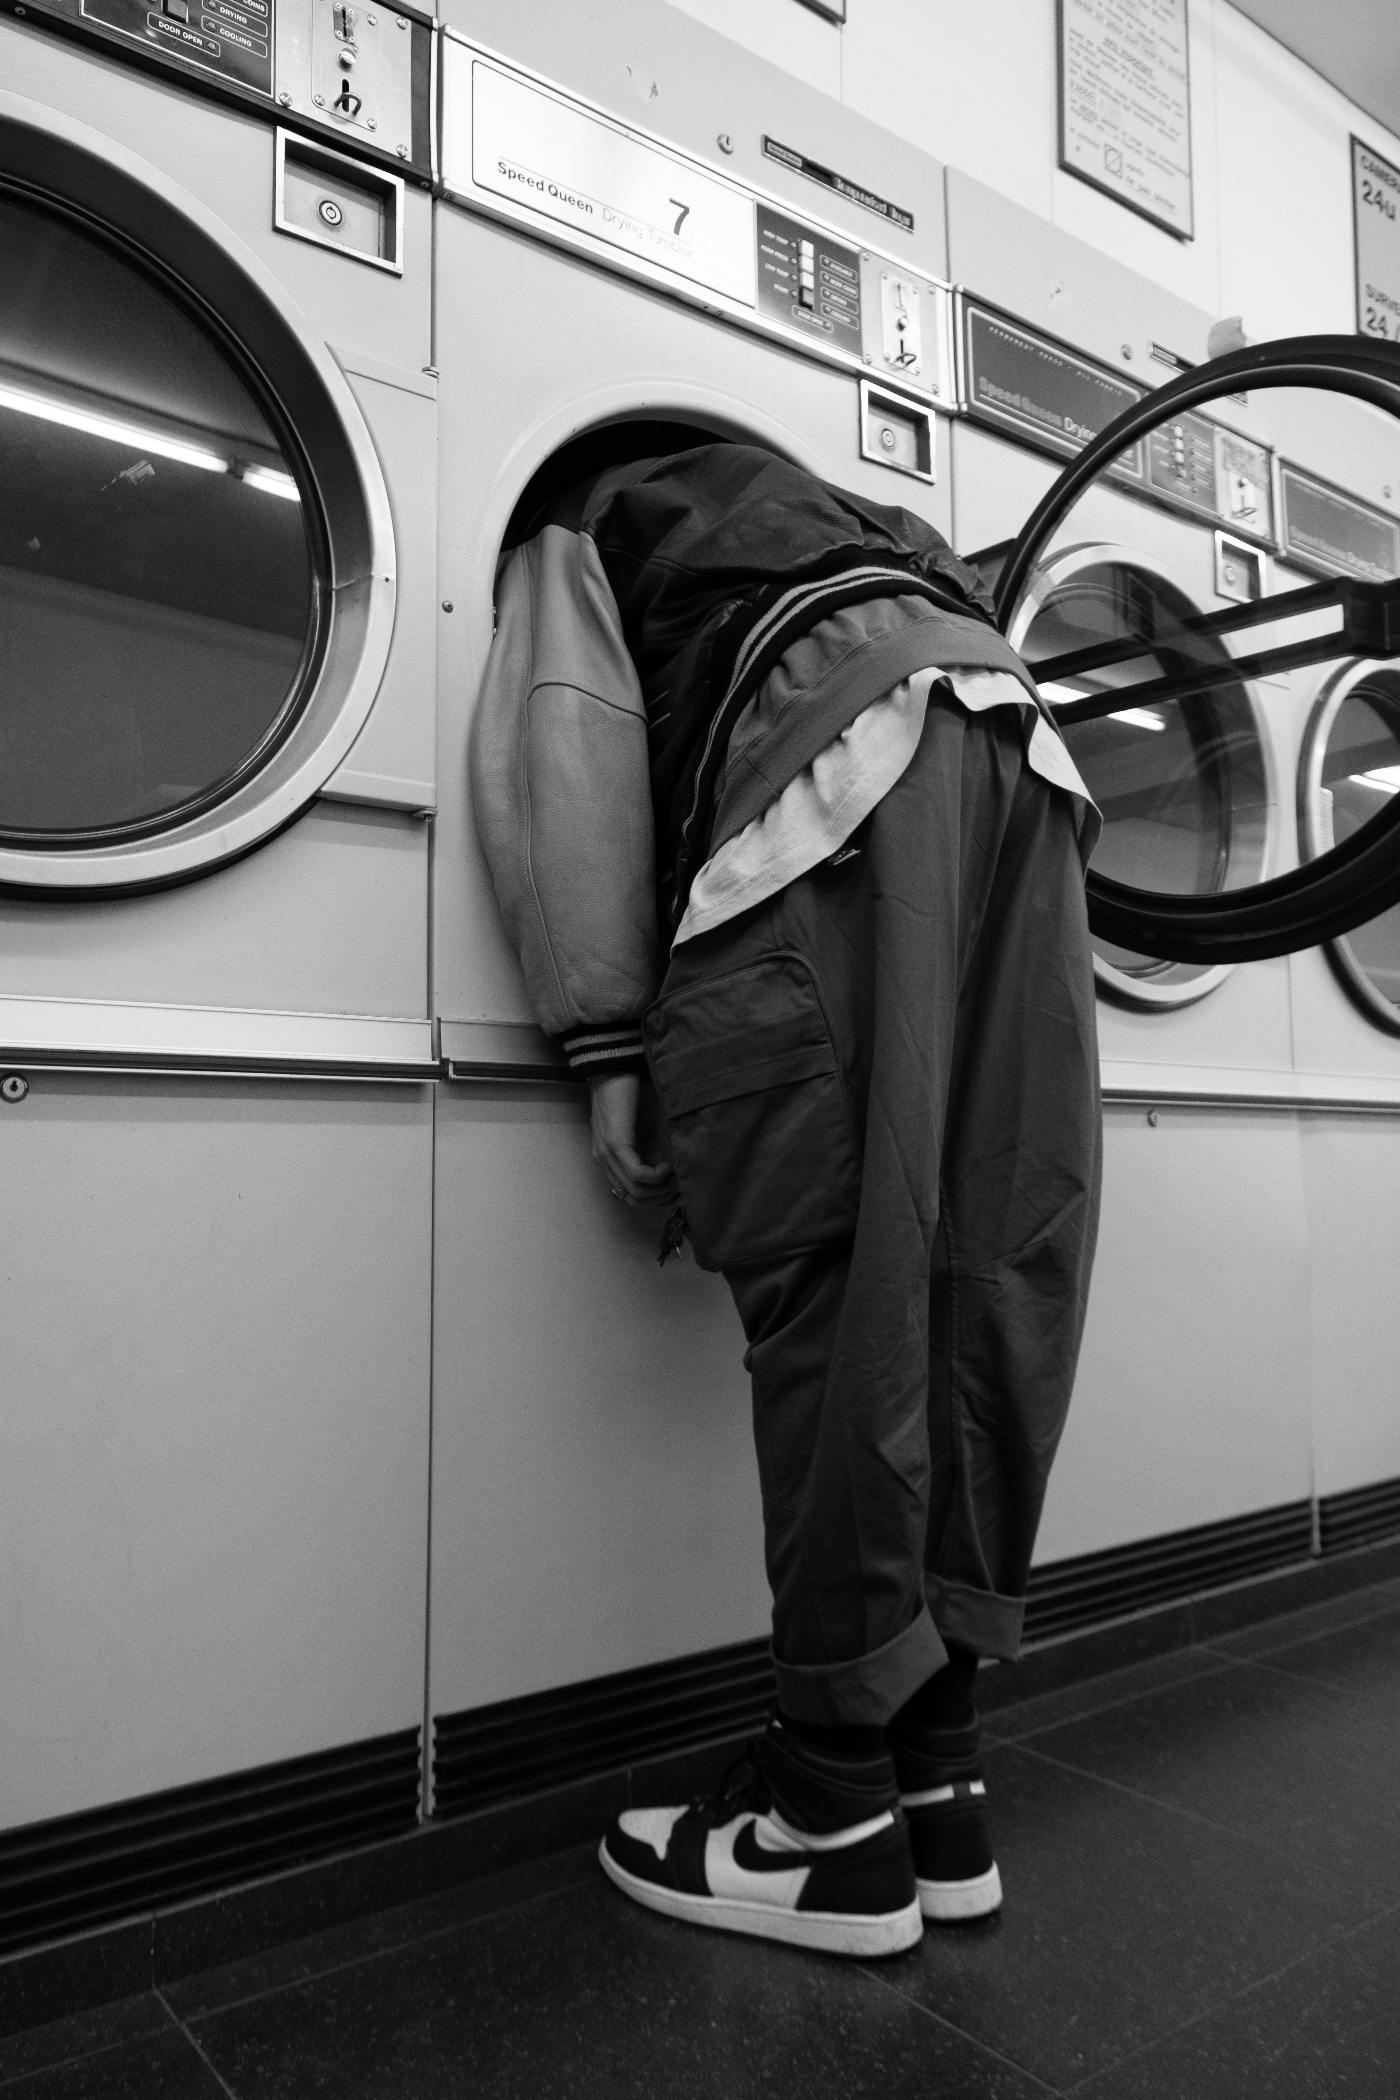 A fully dressed person with their head inside a laundromat dryer